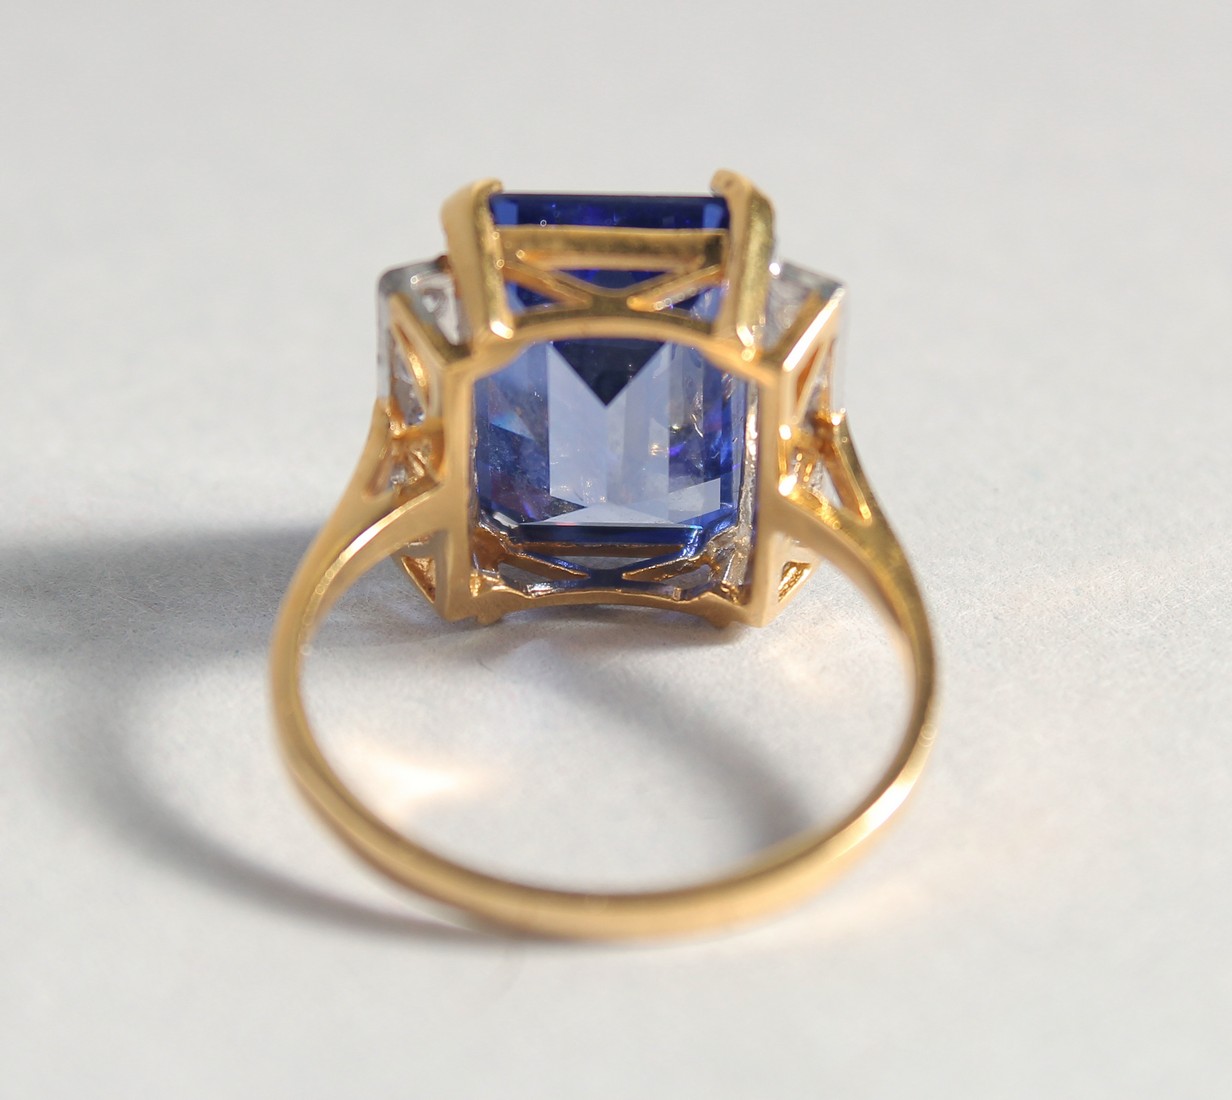 A SILVER GOLD-PLATED FAUX TANZANITE DECO STYLE RING. - Image 2 of 2